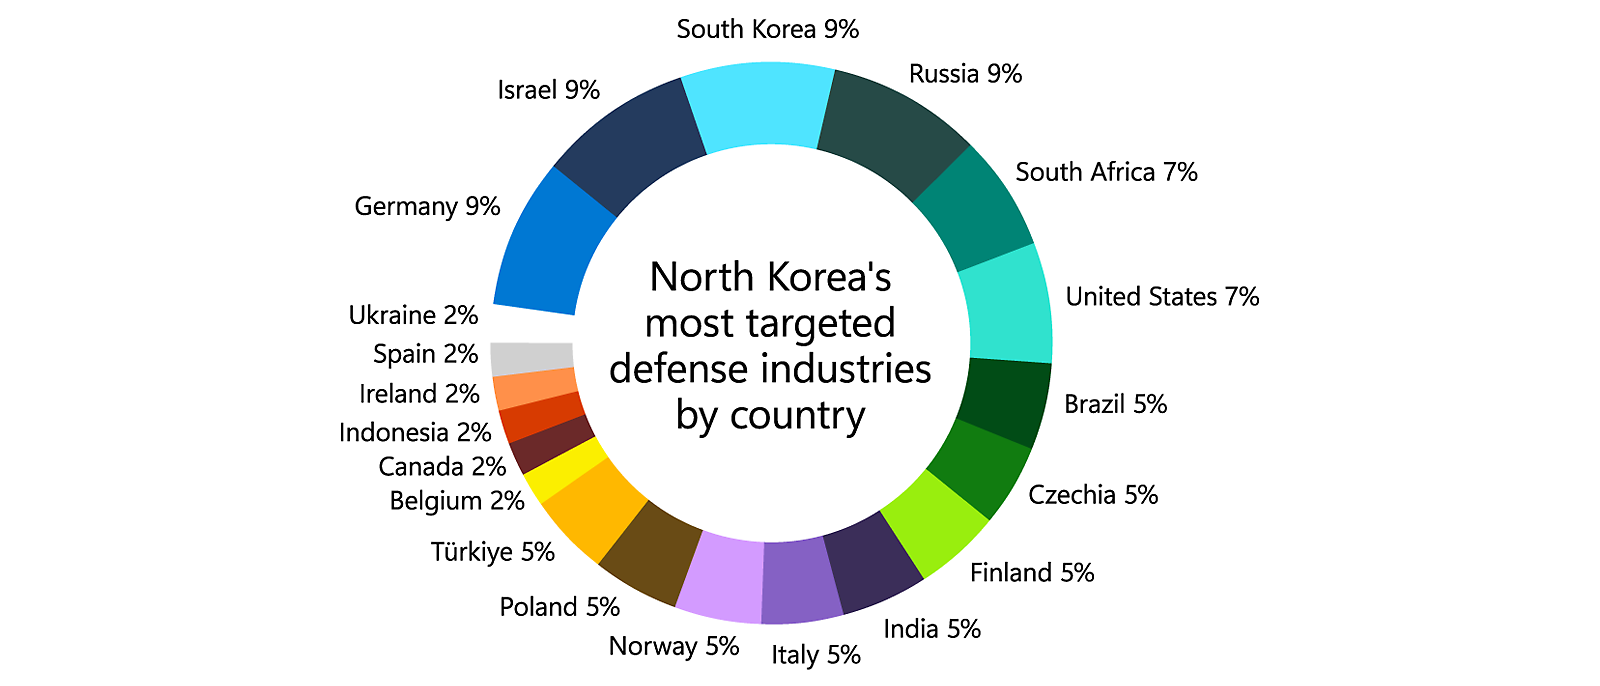 Pie chart showing North Korea’s most targeted defense industries by country